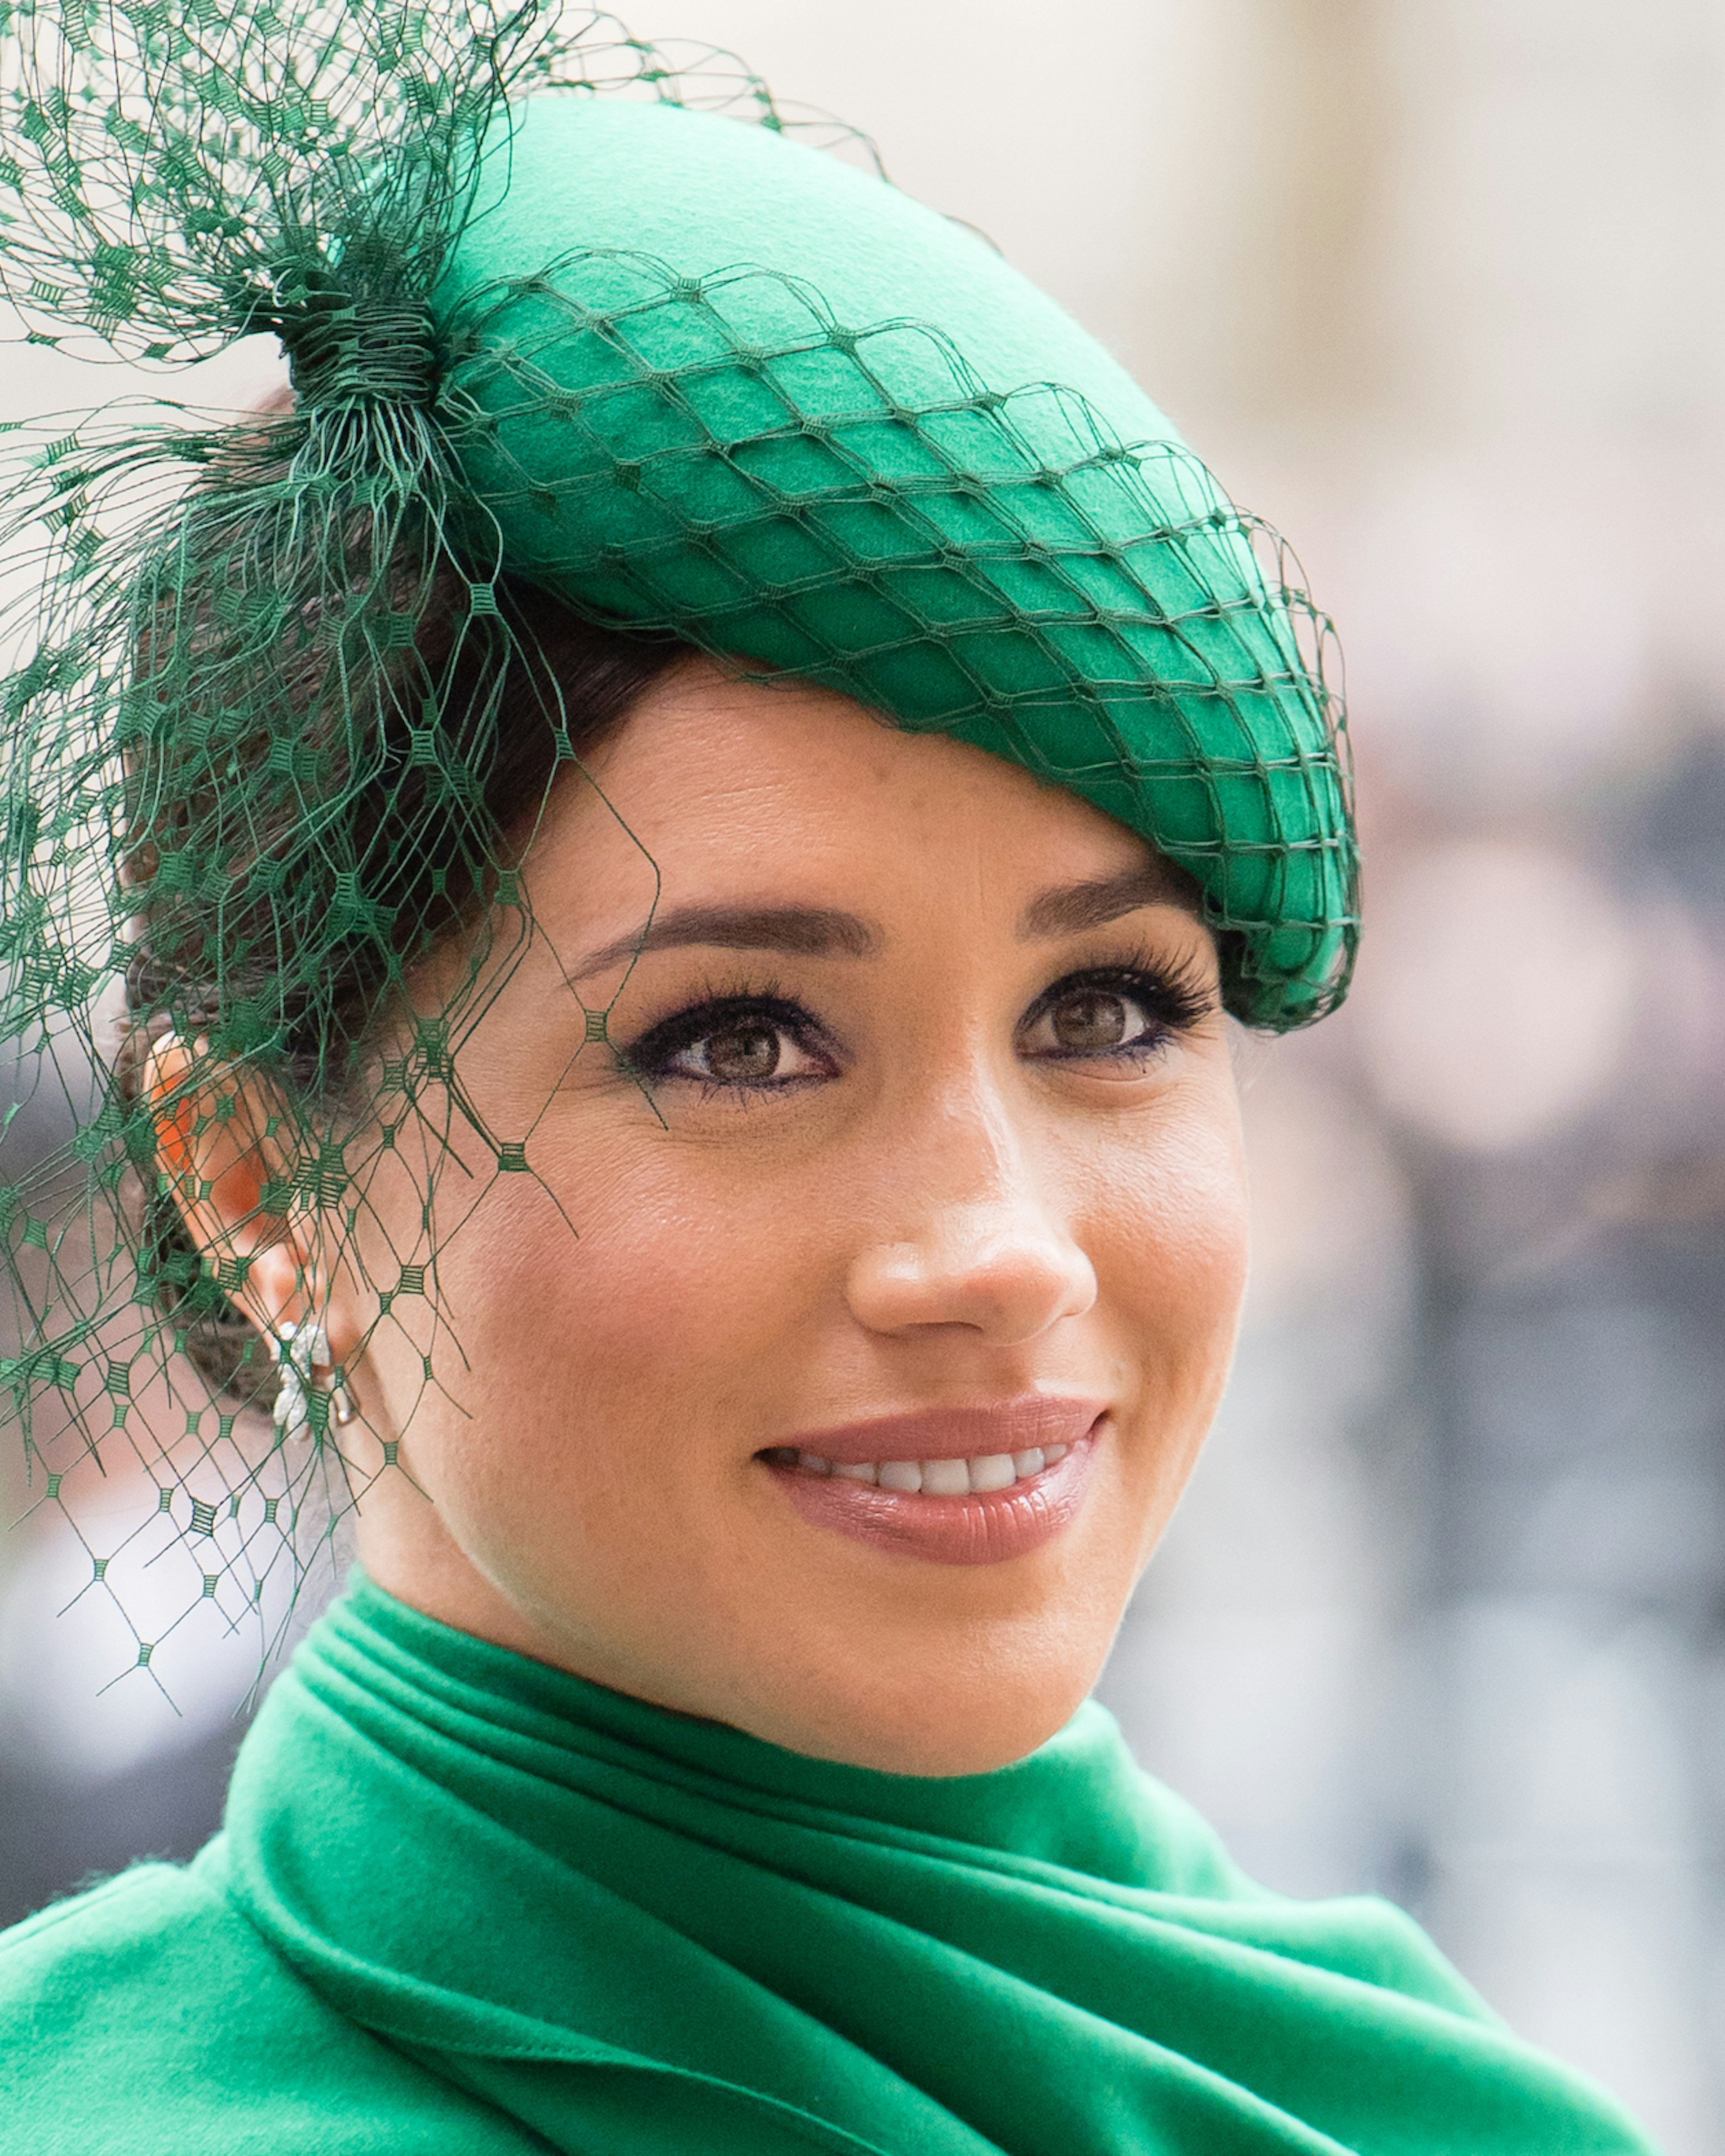 Meghan, Duchess of Sussex attends the Commonwealth Day Service 2020 on March 09, 2020 in London, England. (Photo by Samir Hussein/WireImage)